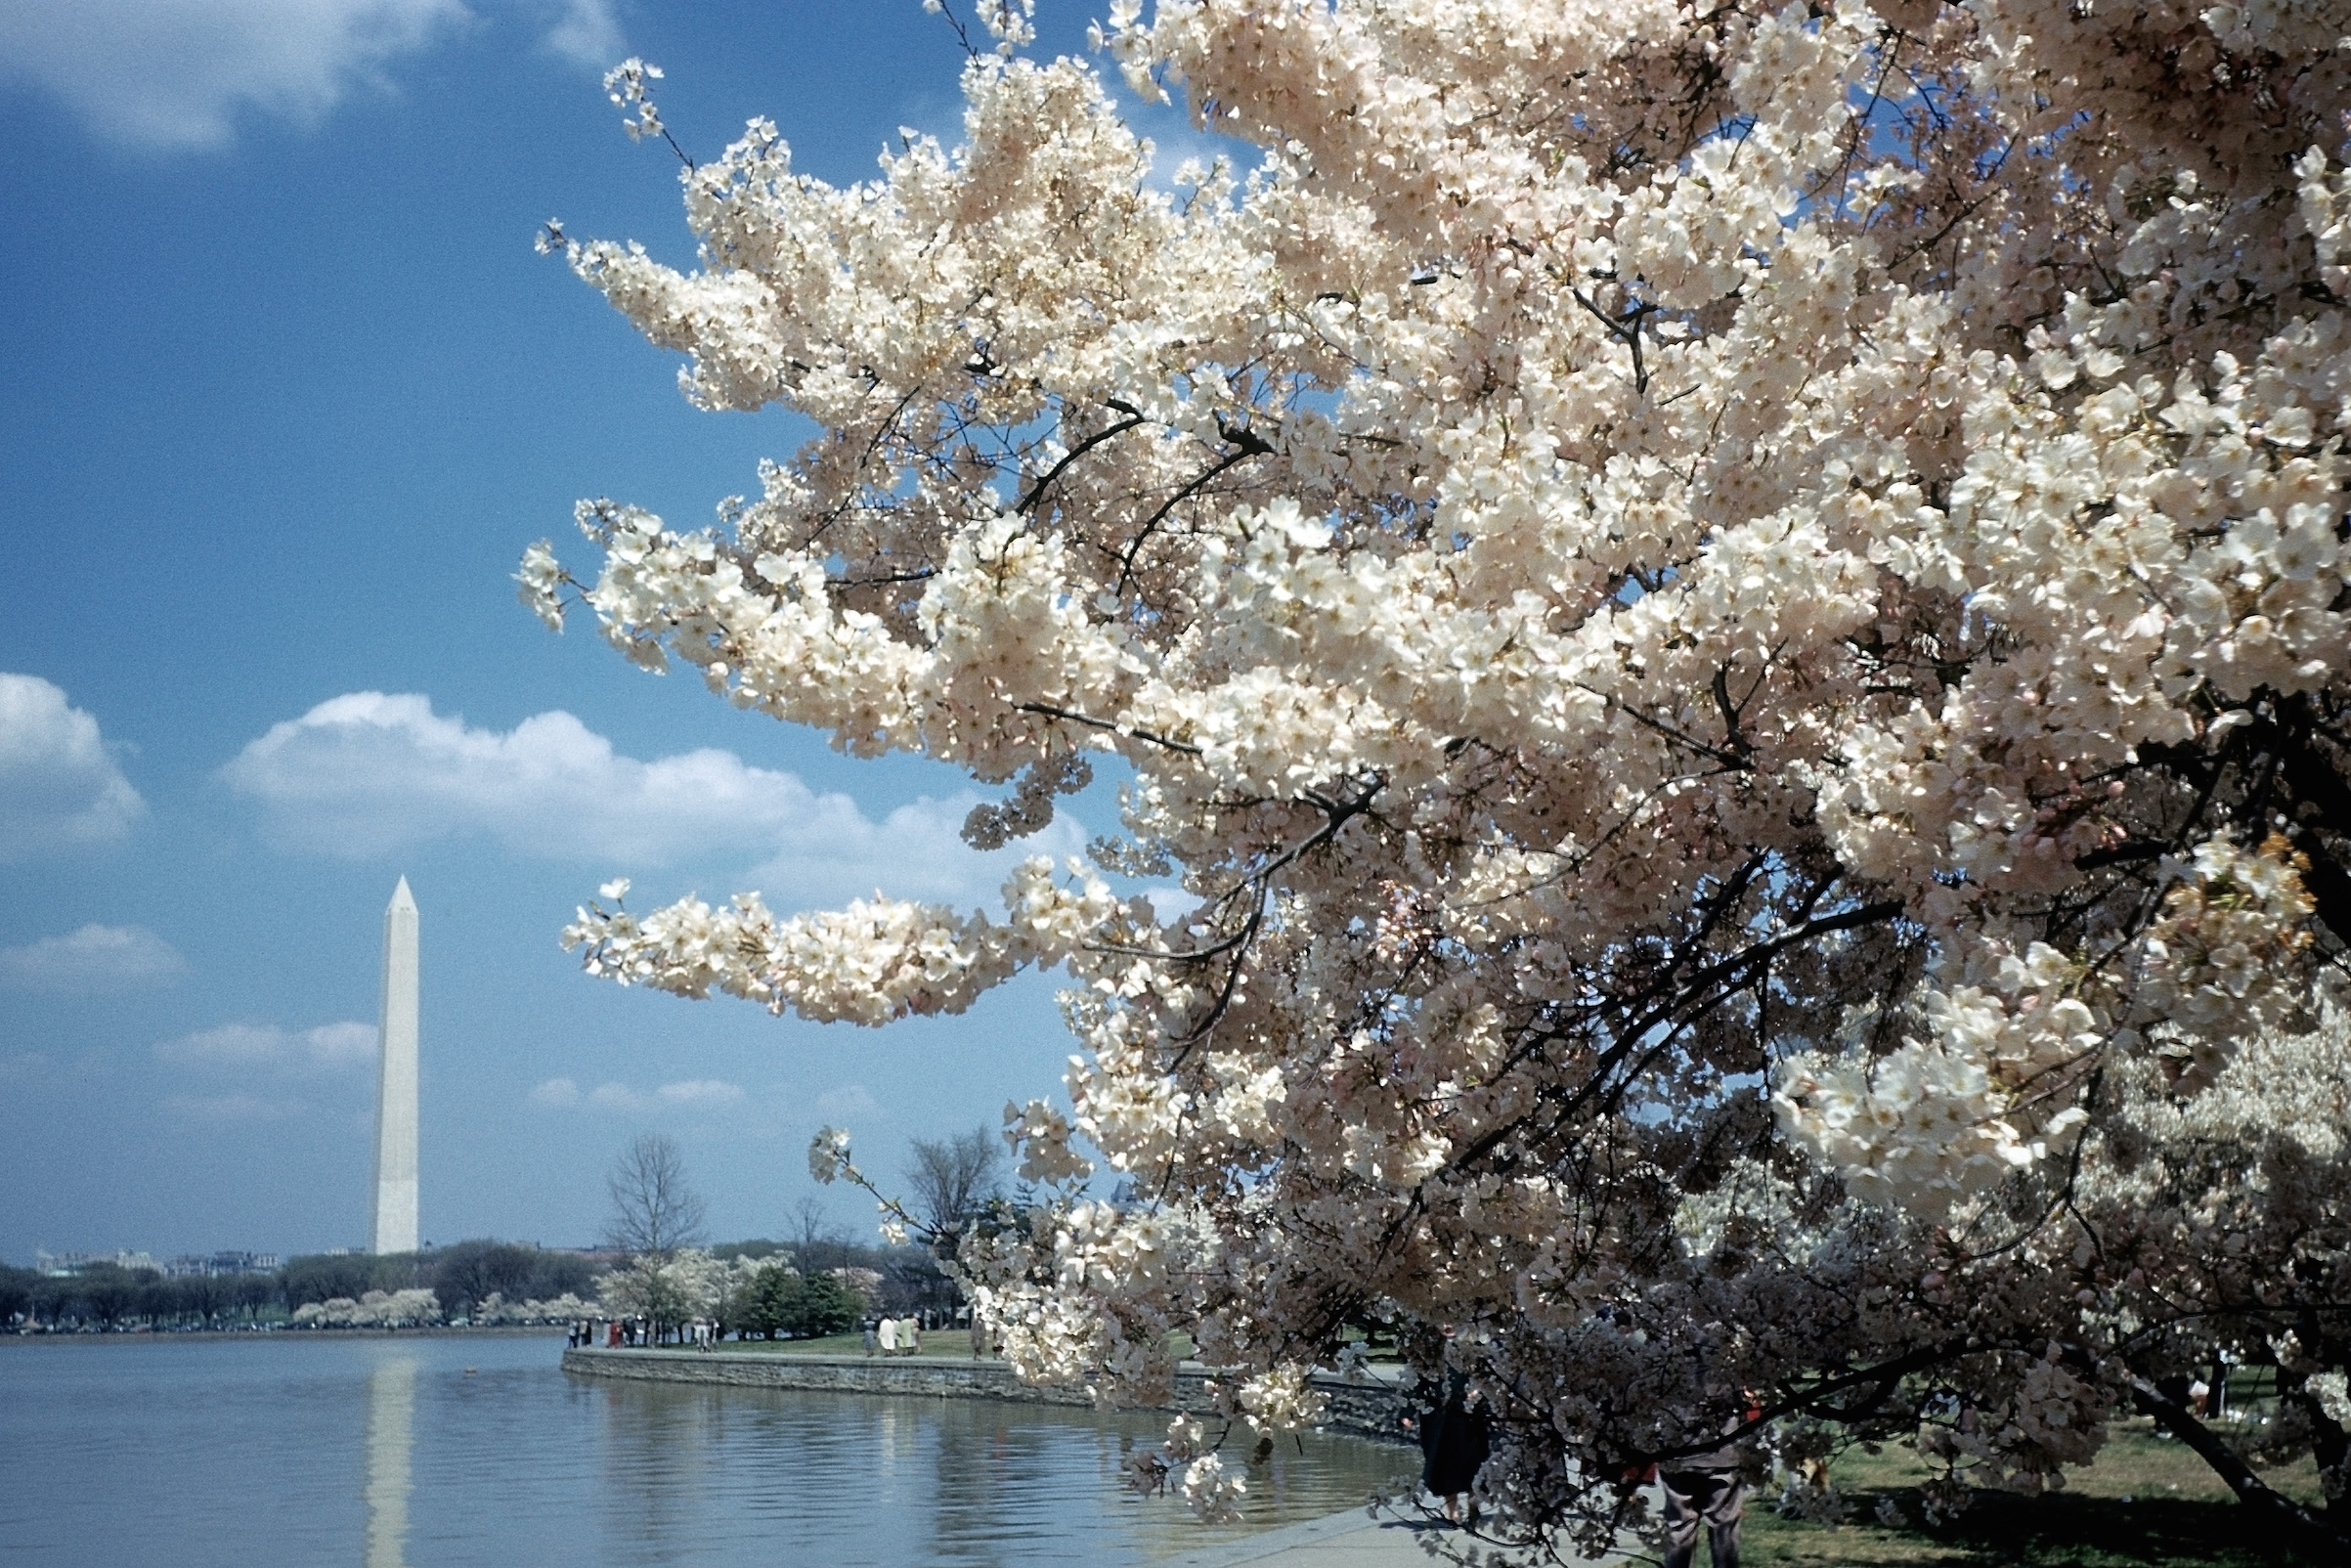 A view of the cherry blossoms and the Washington Monument and the Tidal Basin in Washington, D.C., circa 1948 (Michael Ochs Archives/Getty Images)